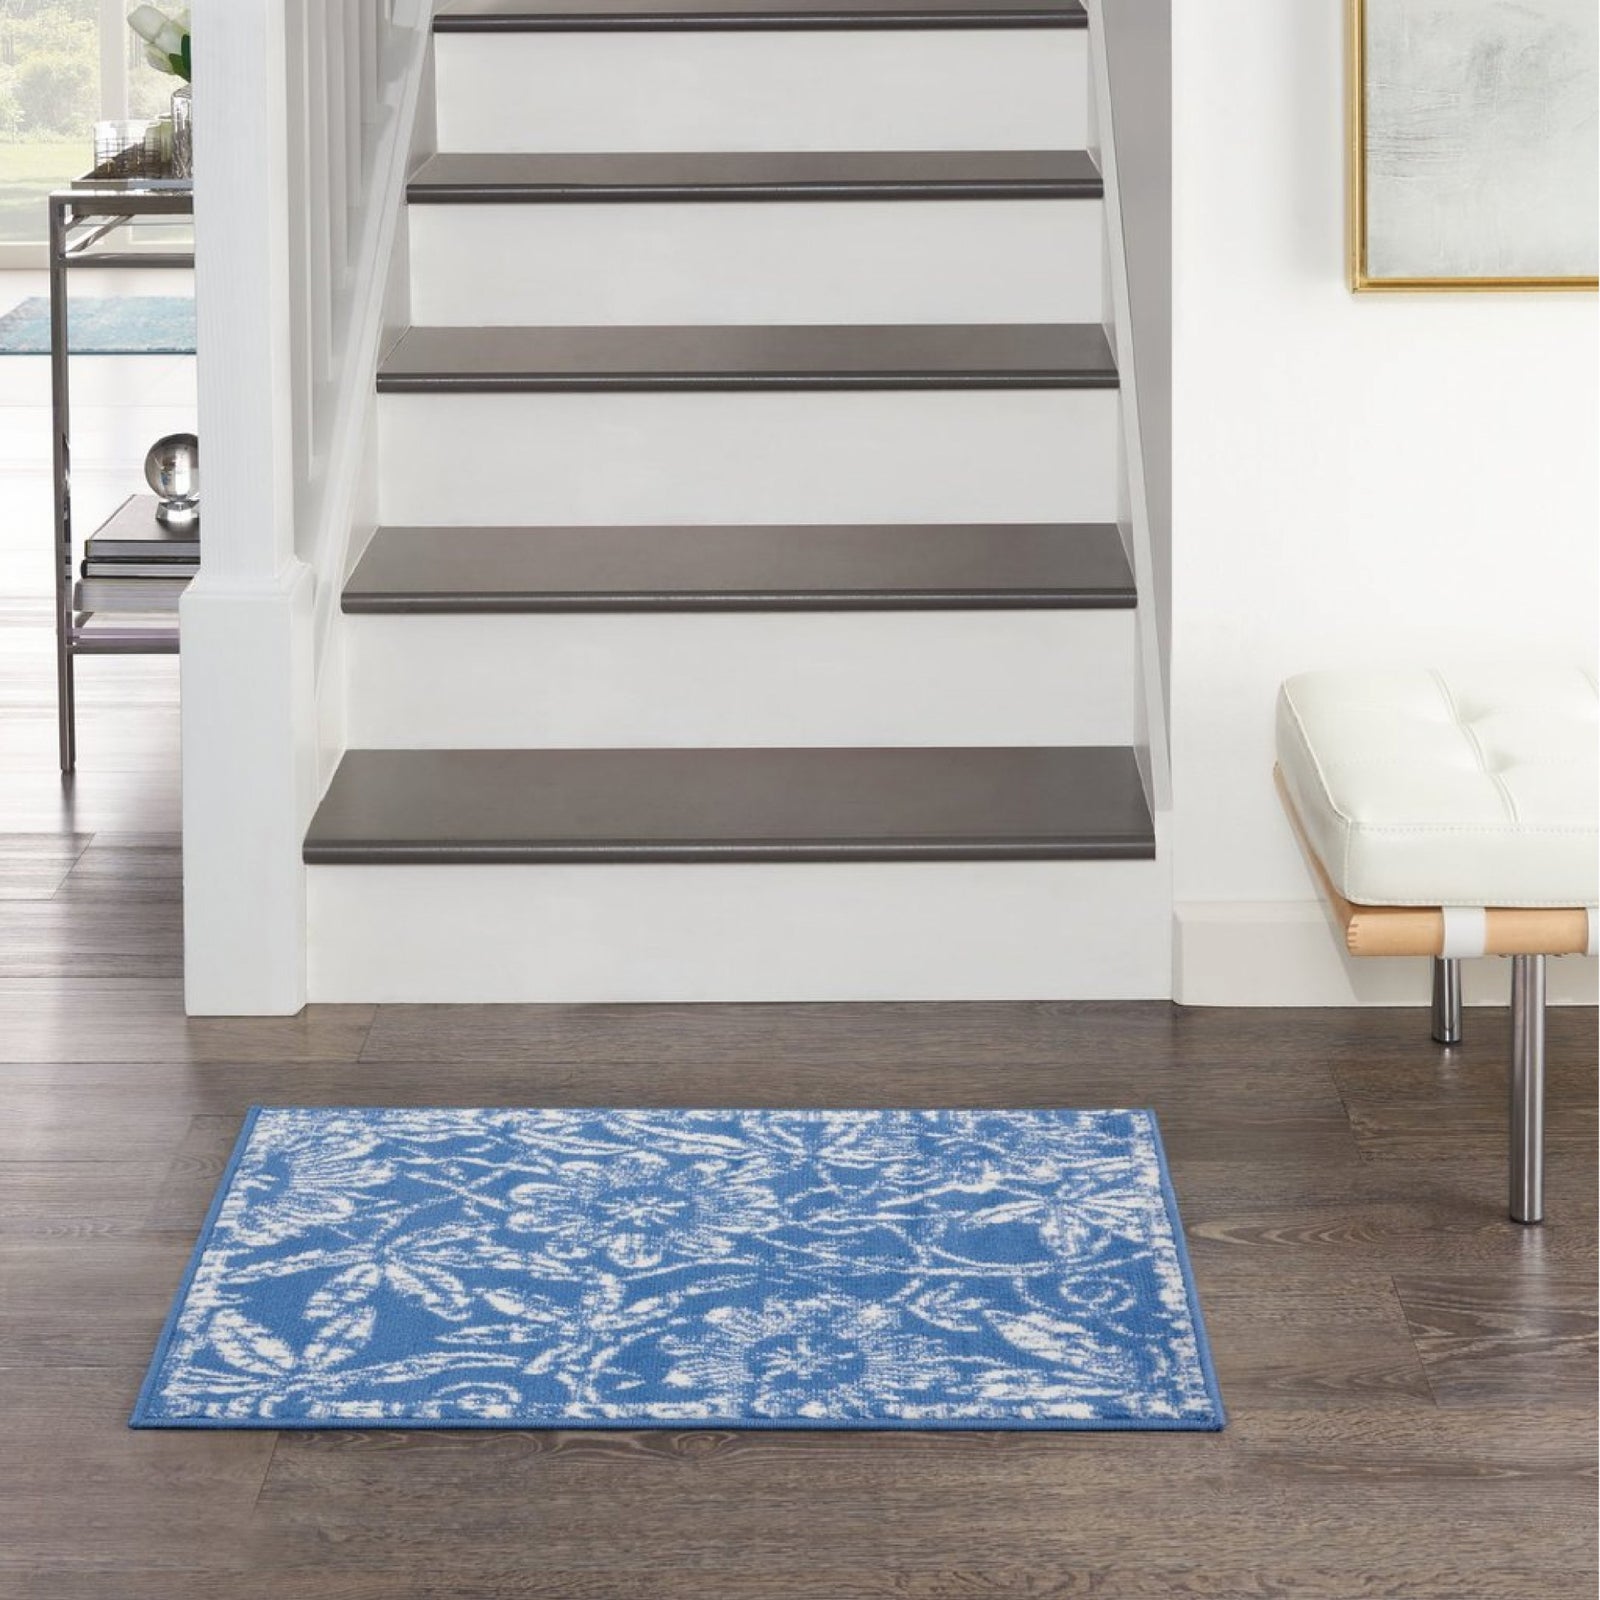 4’ X 6’ Blue And Ivory Floral Vines Area Rug